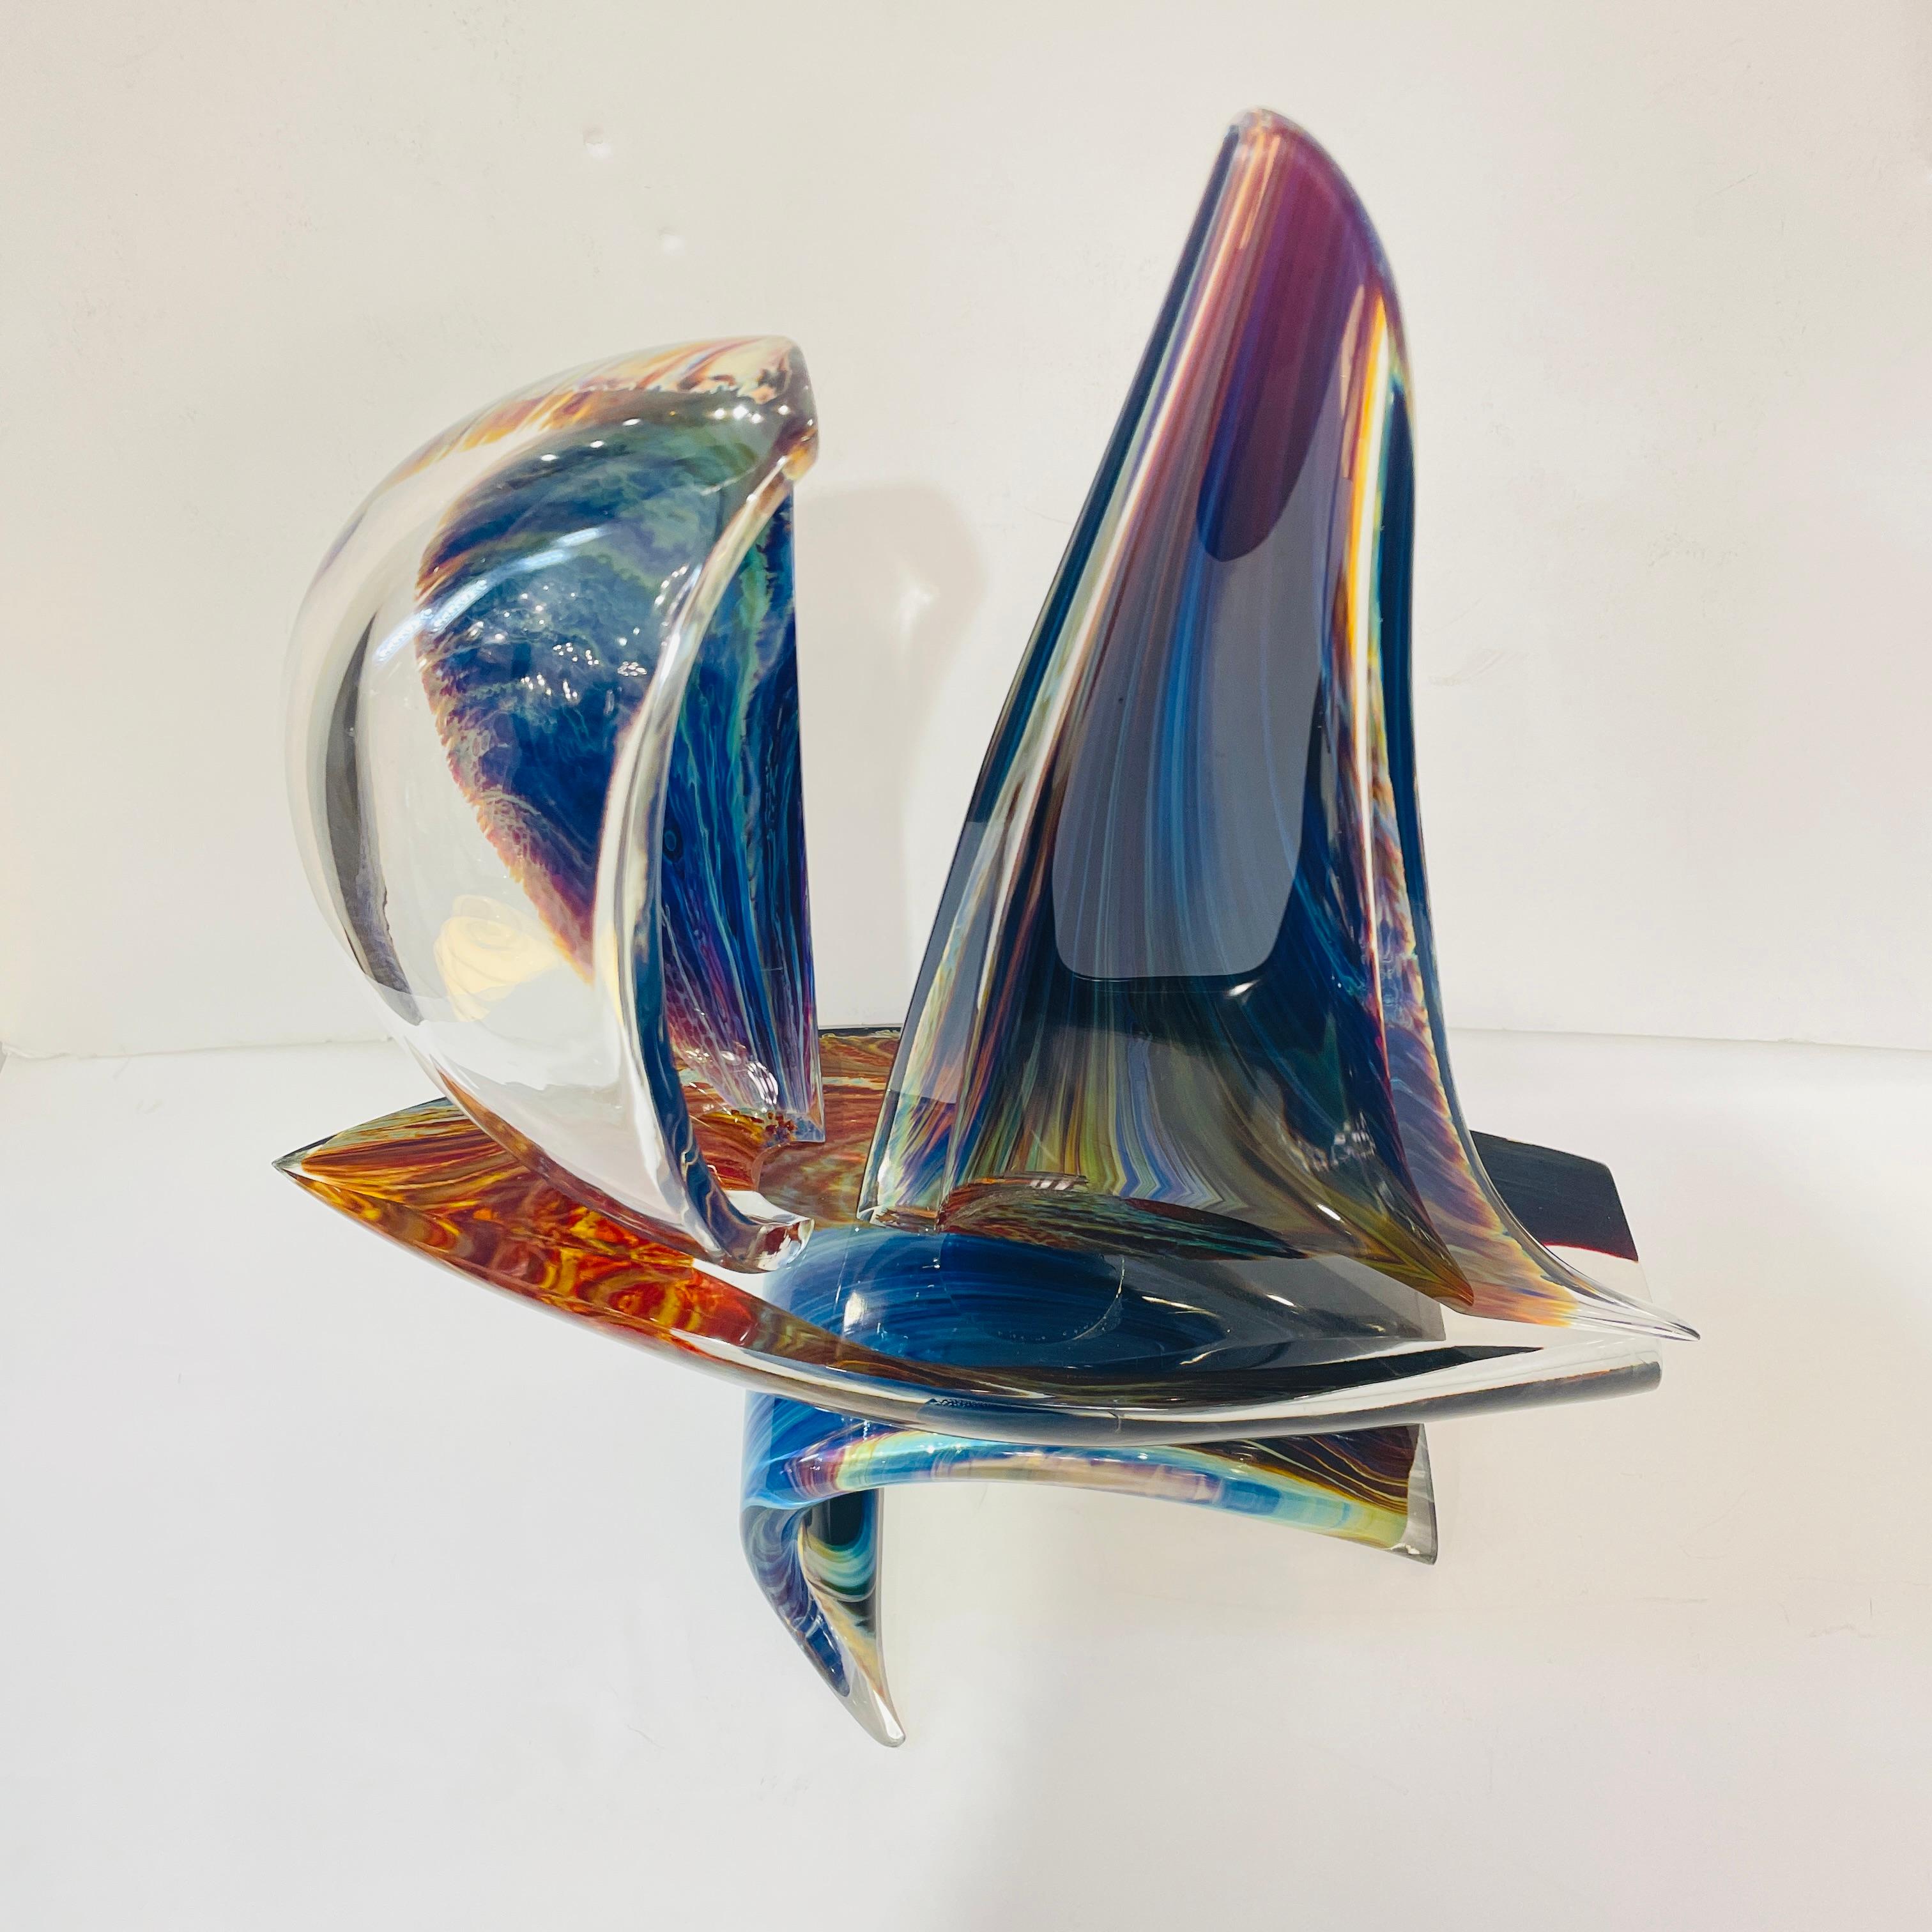 Hand-Crafted 2015 Italian Yellow Blue Brown Crystal Murano Glass Boat Modernist Art Sculpture